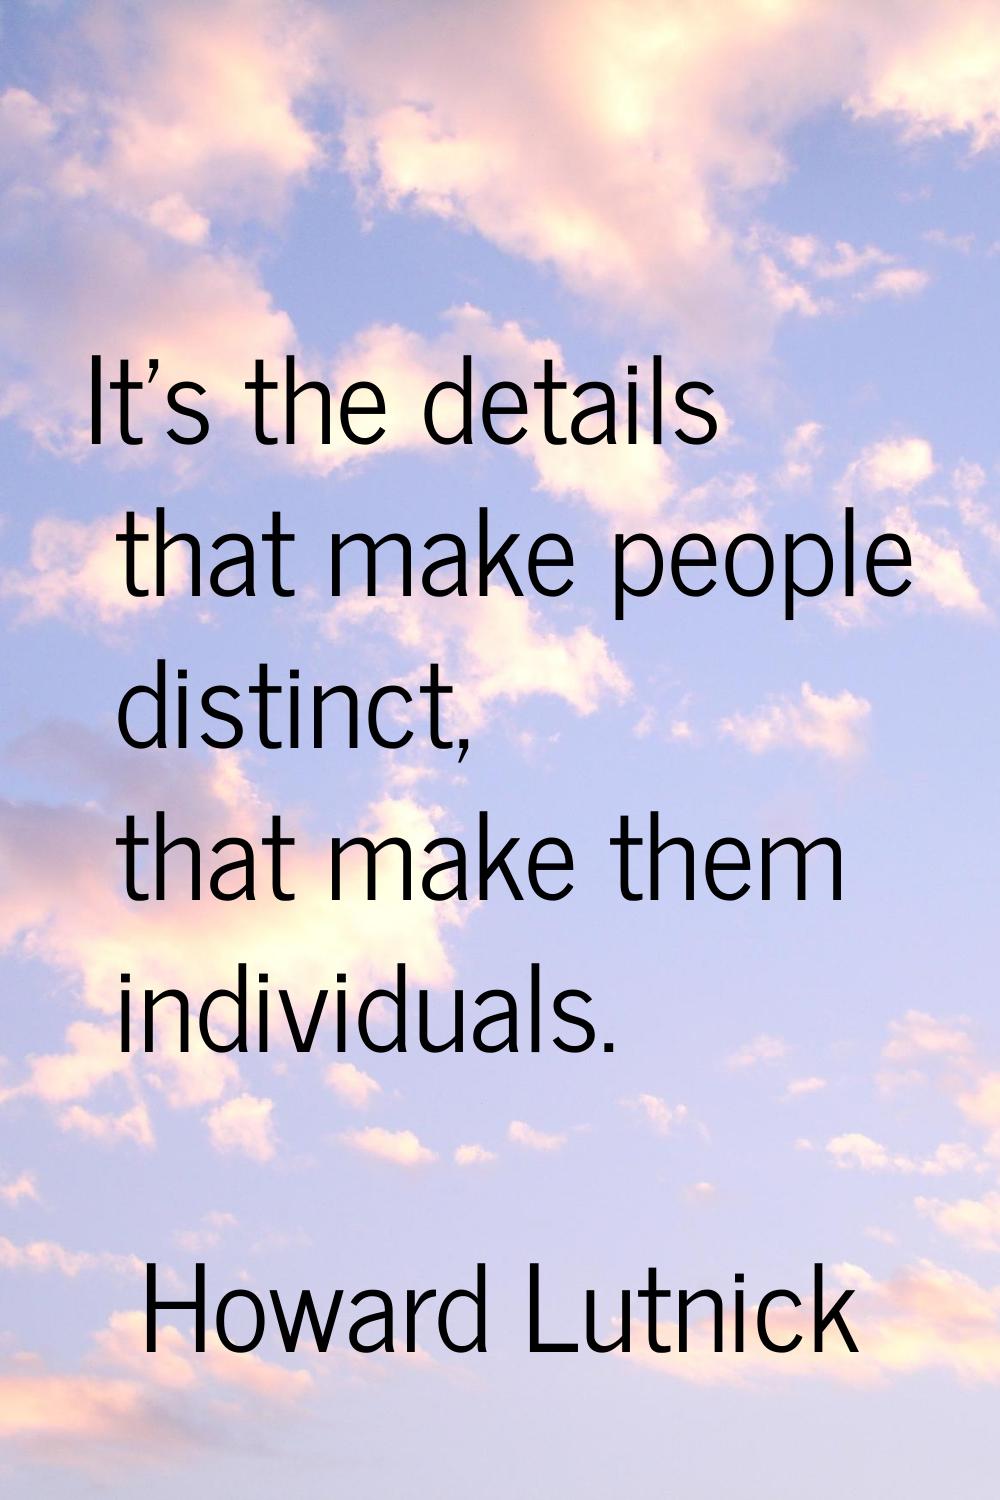 It's the details that make people distinct, that make them individuals.